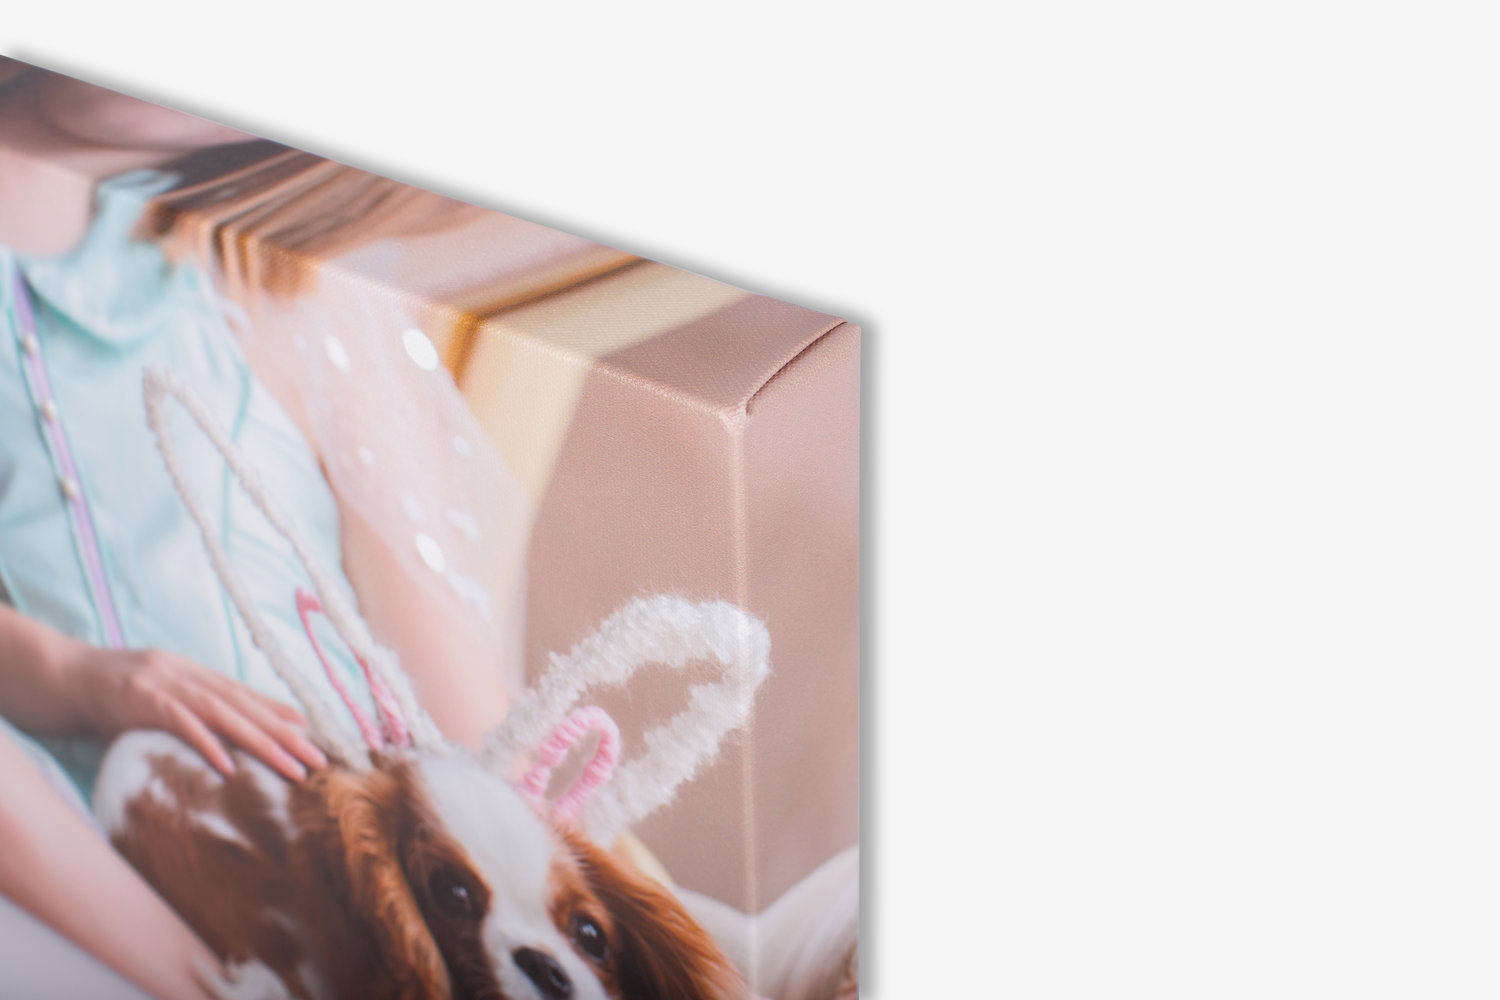 What is Gallery Wrapped Canvas?